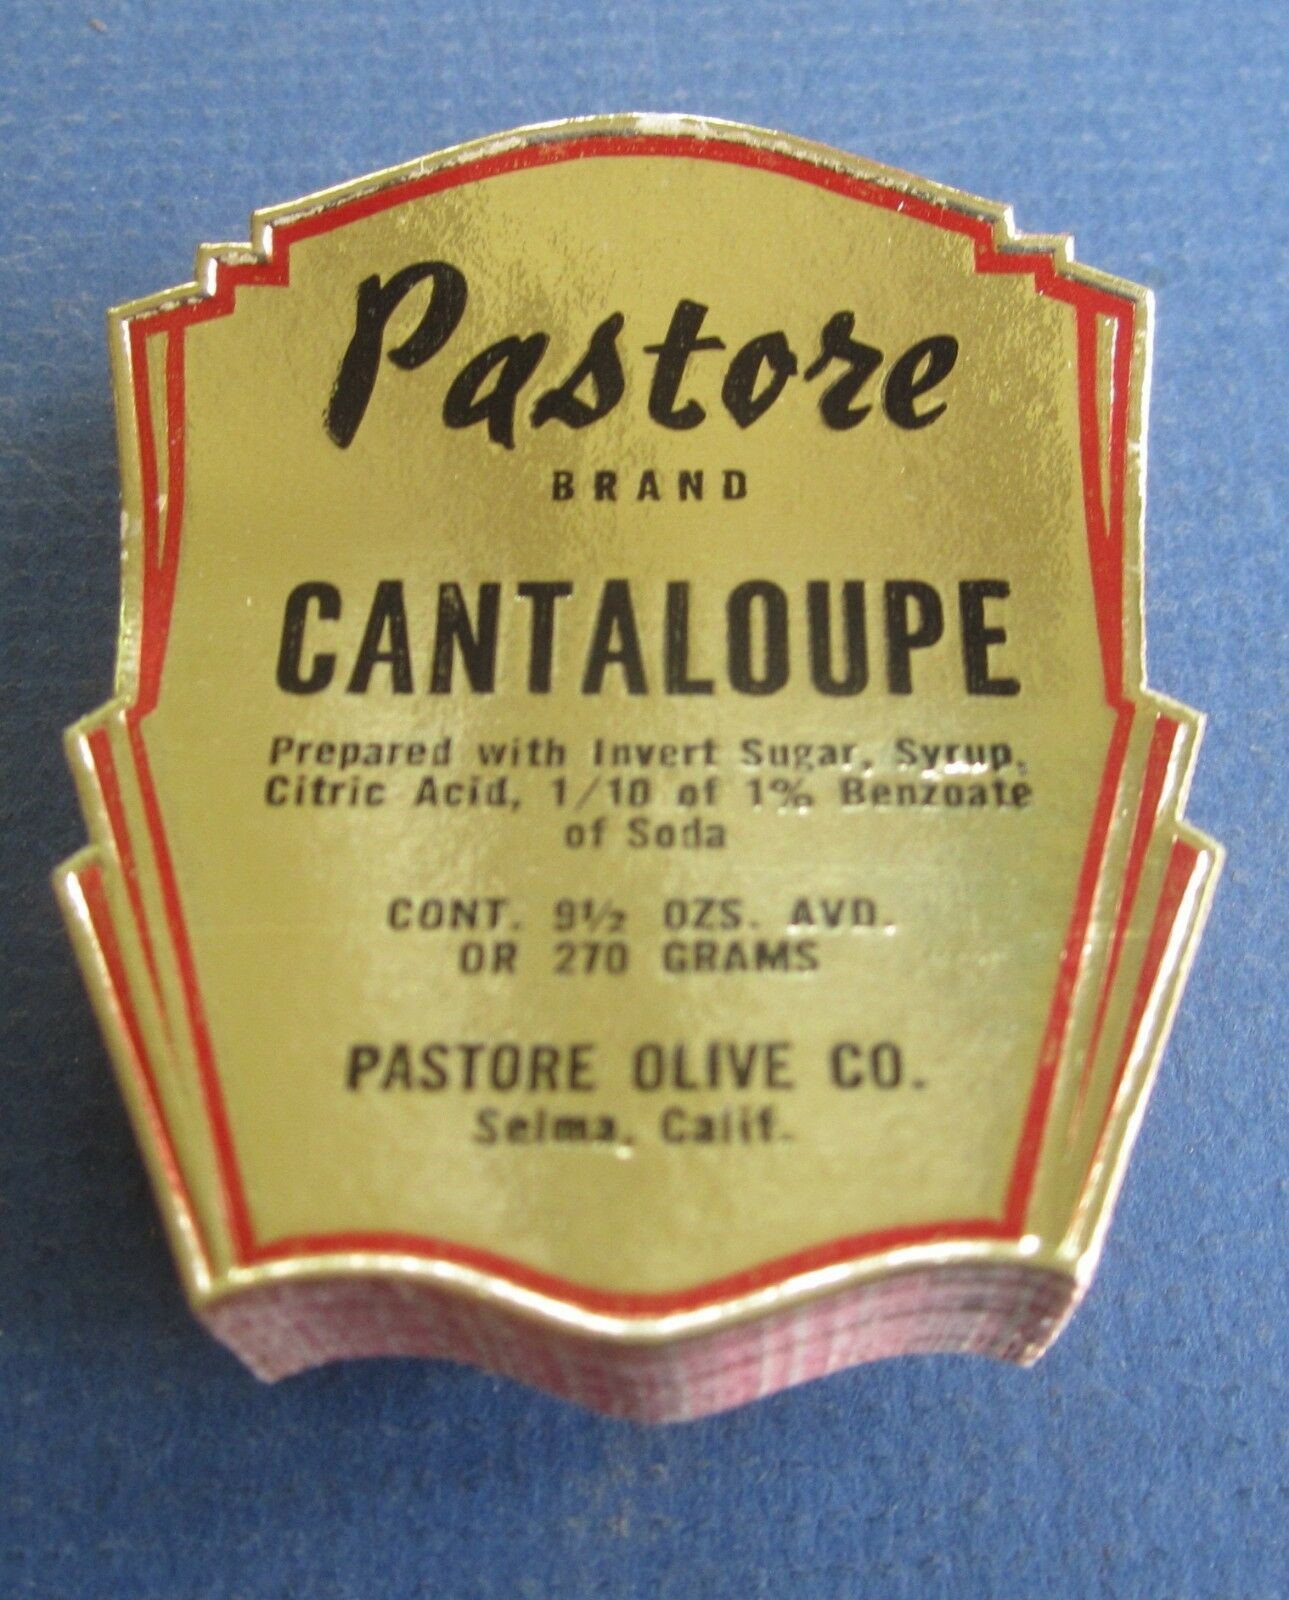 Lot of 100 Old Vintage PASTORE - CANTALOUPE LAB...